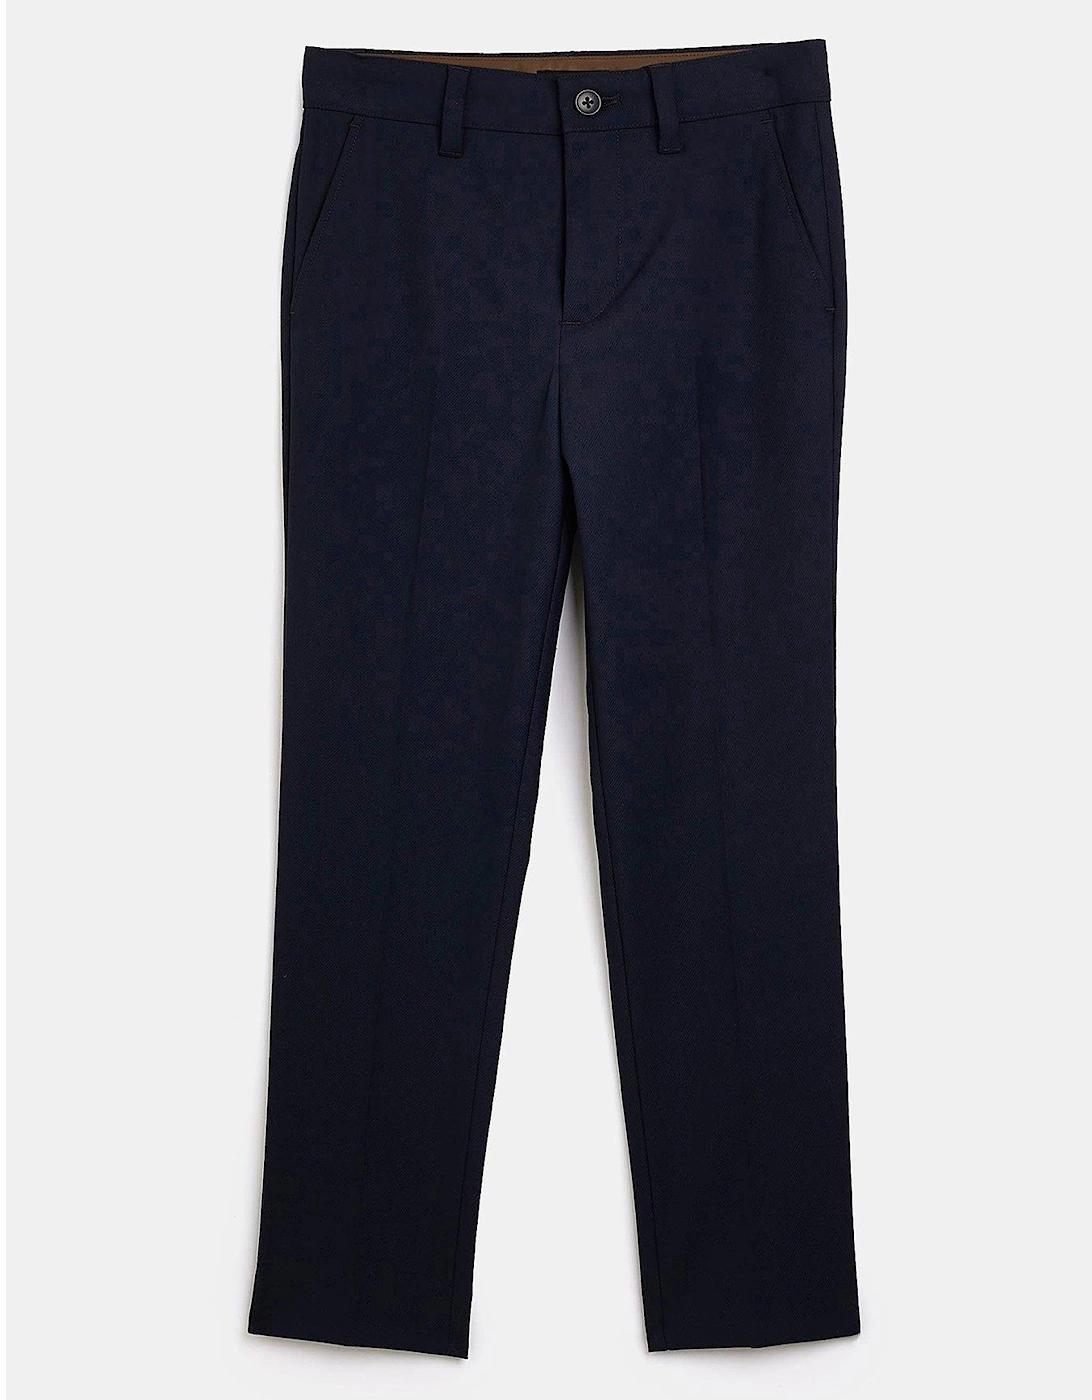 Boys Suit Trousers - Navy, 6 of 5